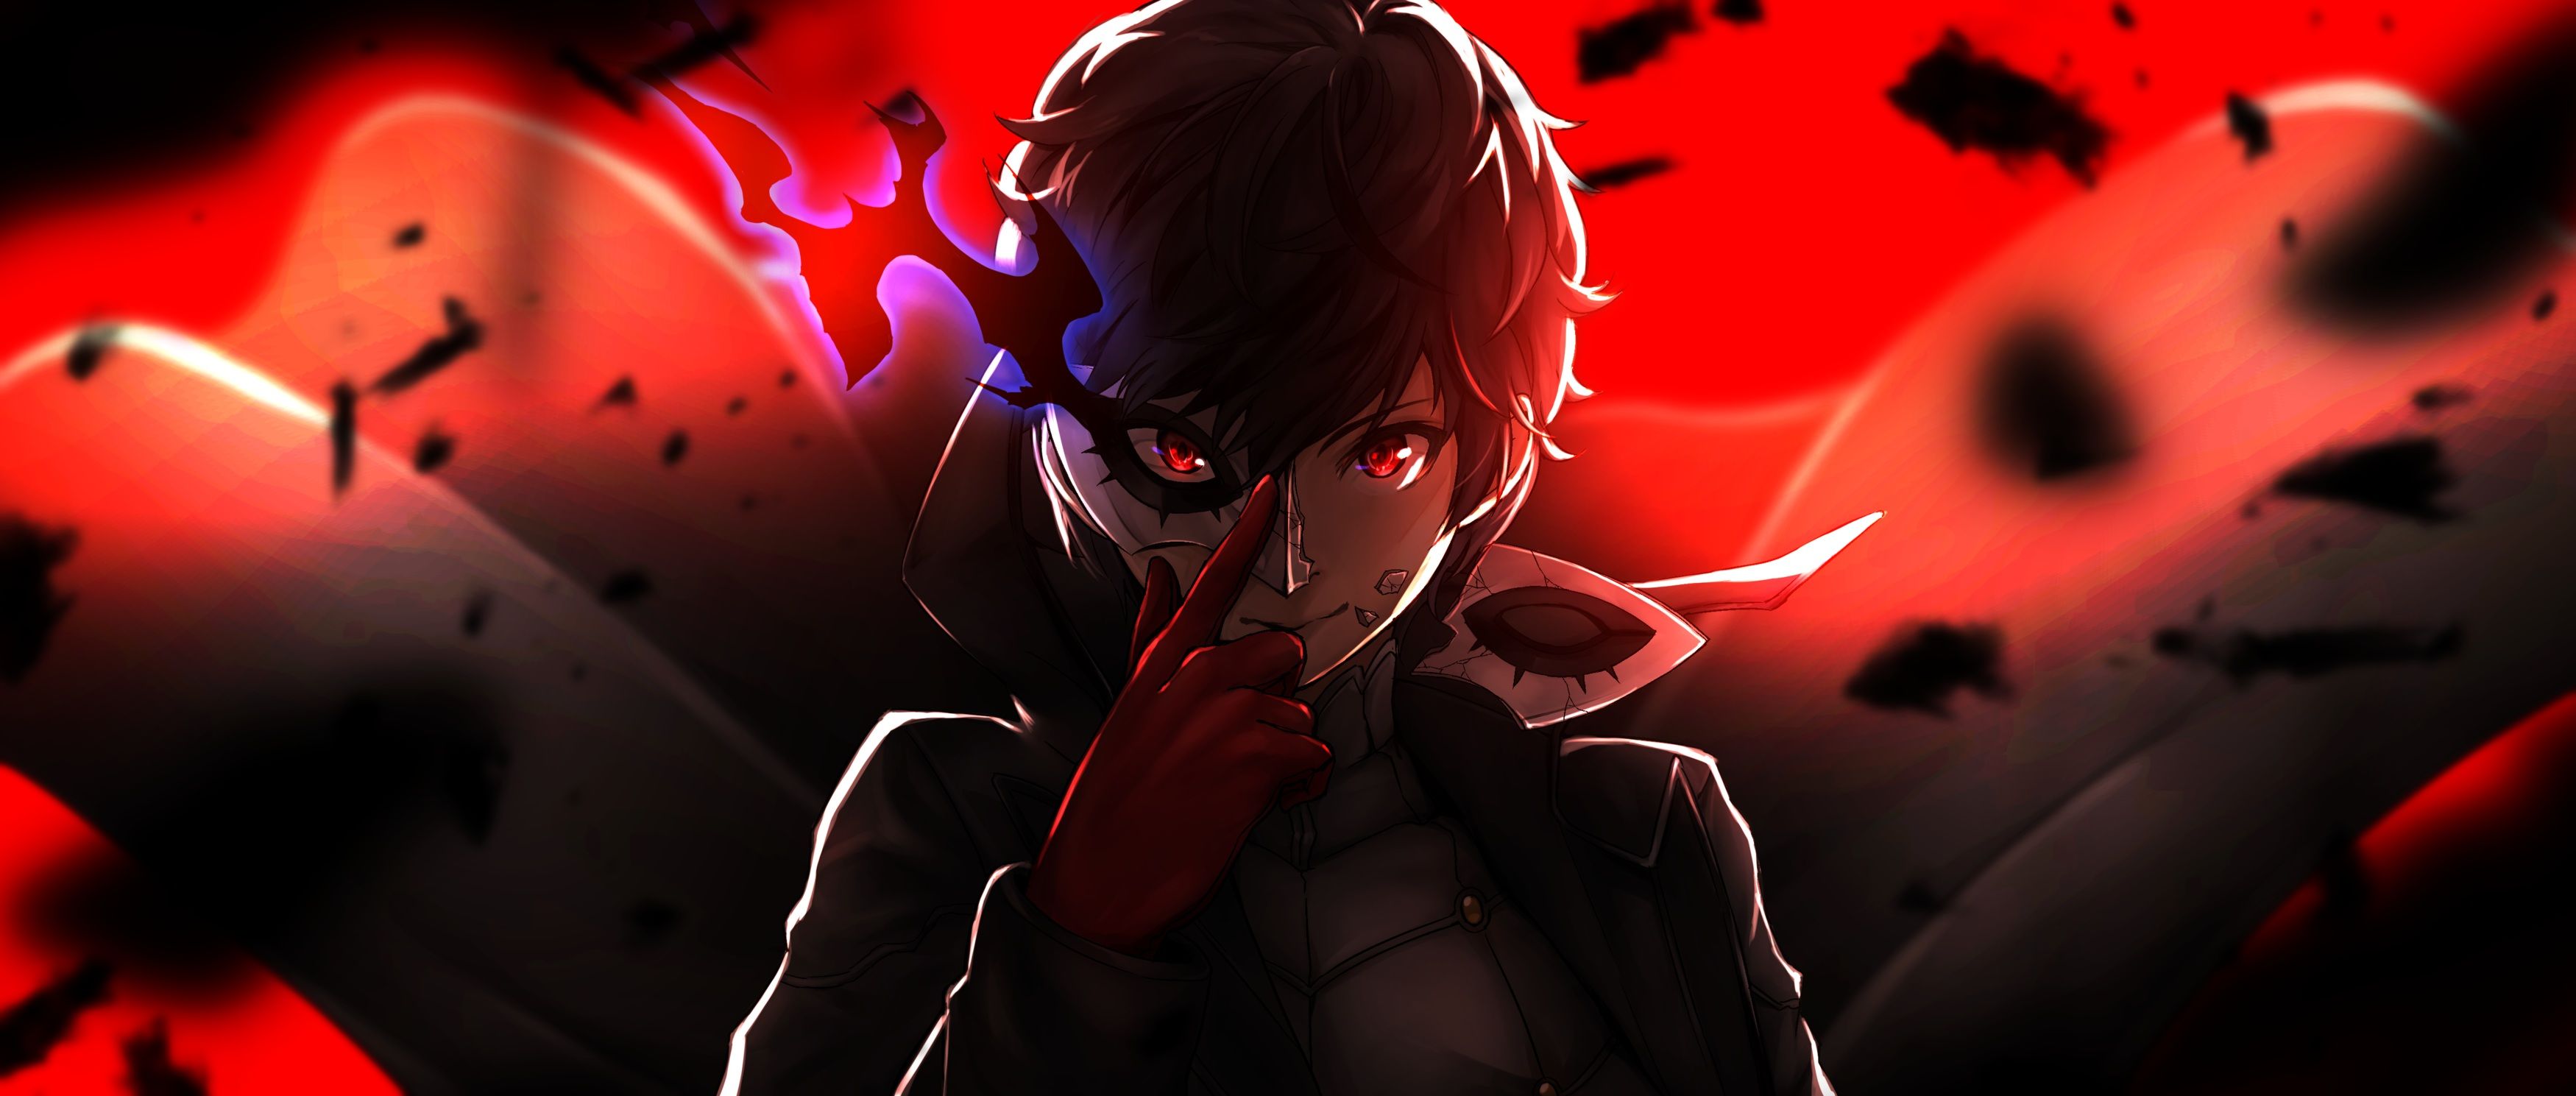 Persona 5 PC Wallpapers - 4k, HD Persona 5 PC Backgrounds on WallpaperBat